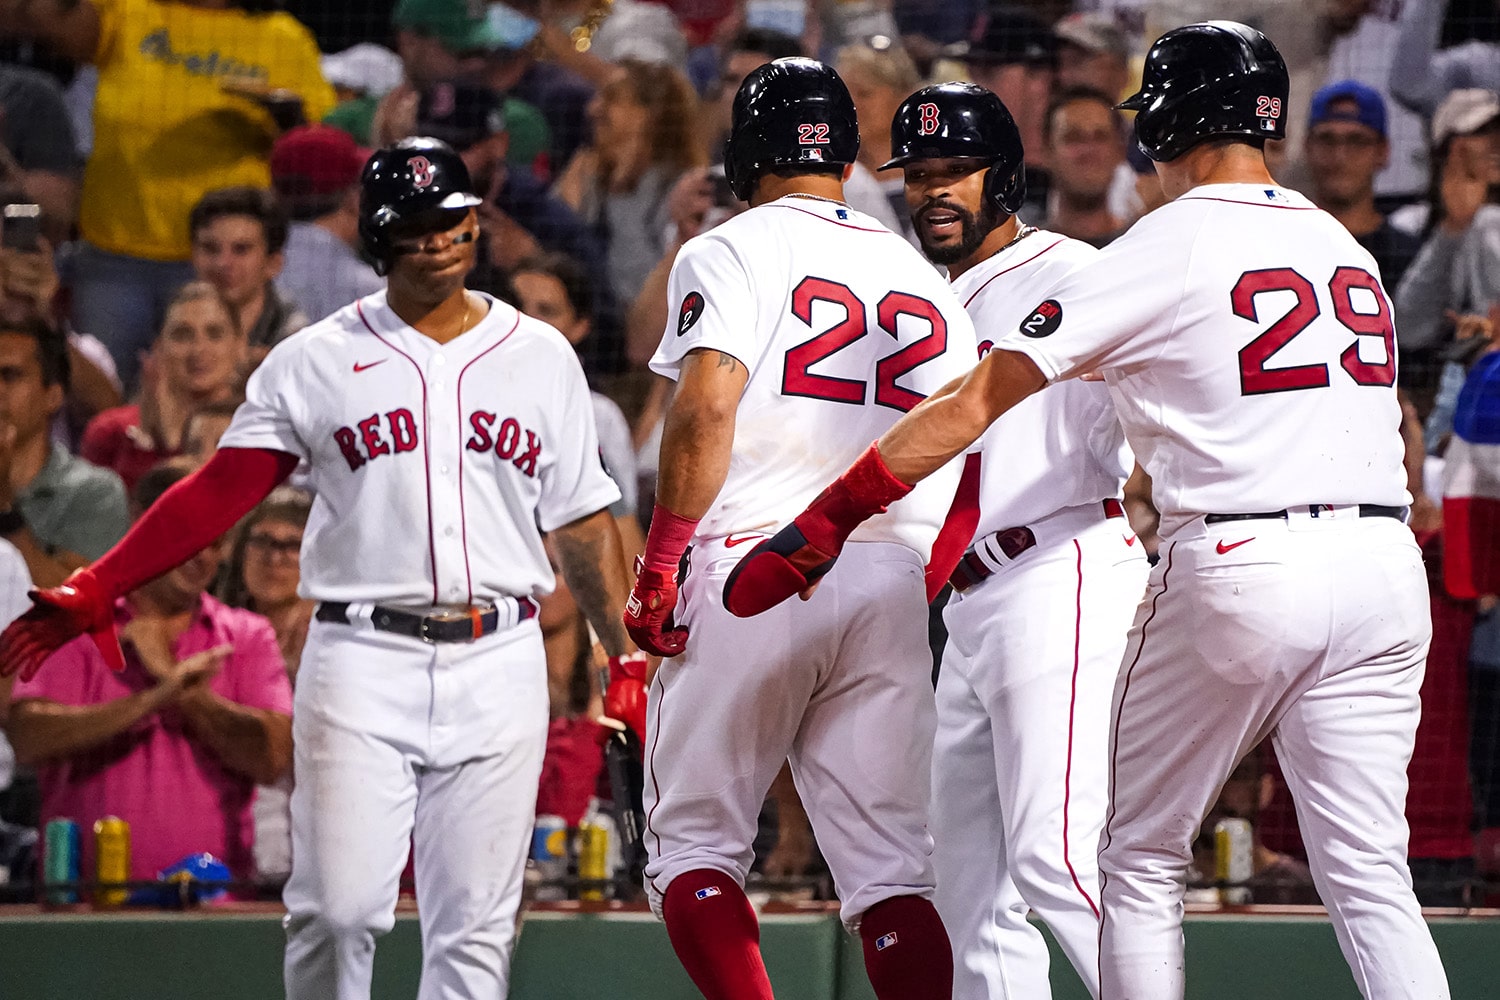 Red Sox debut new uniform advertisements as part of 10-year deal